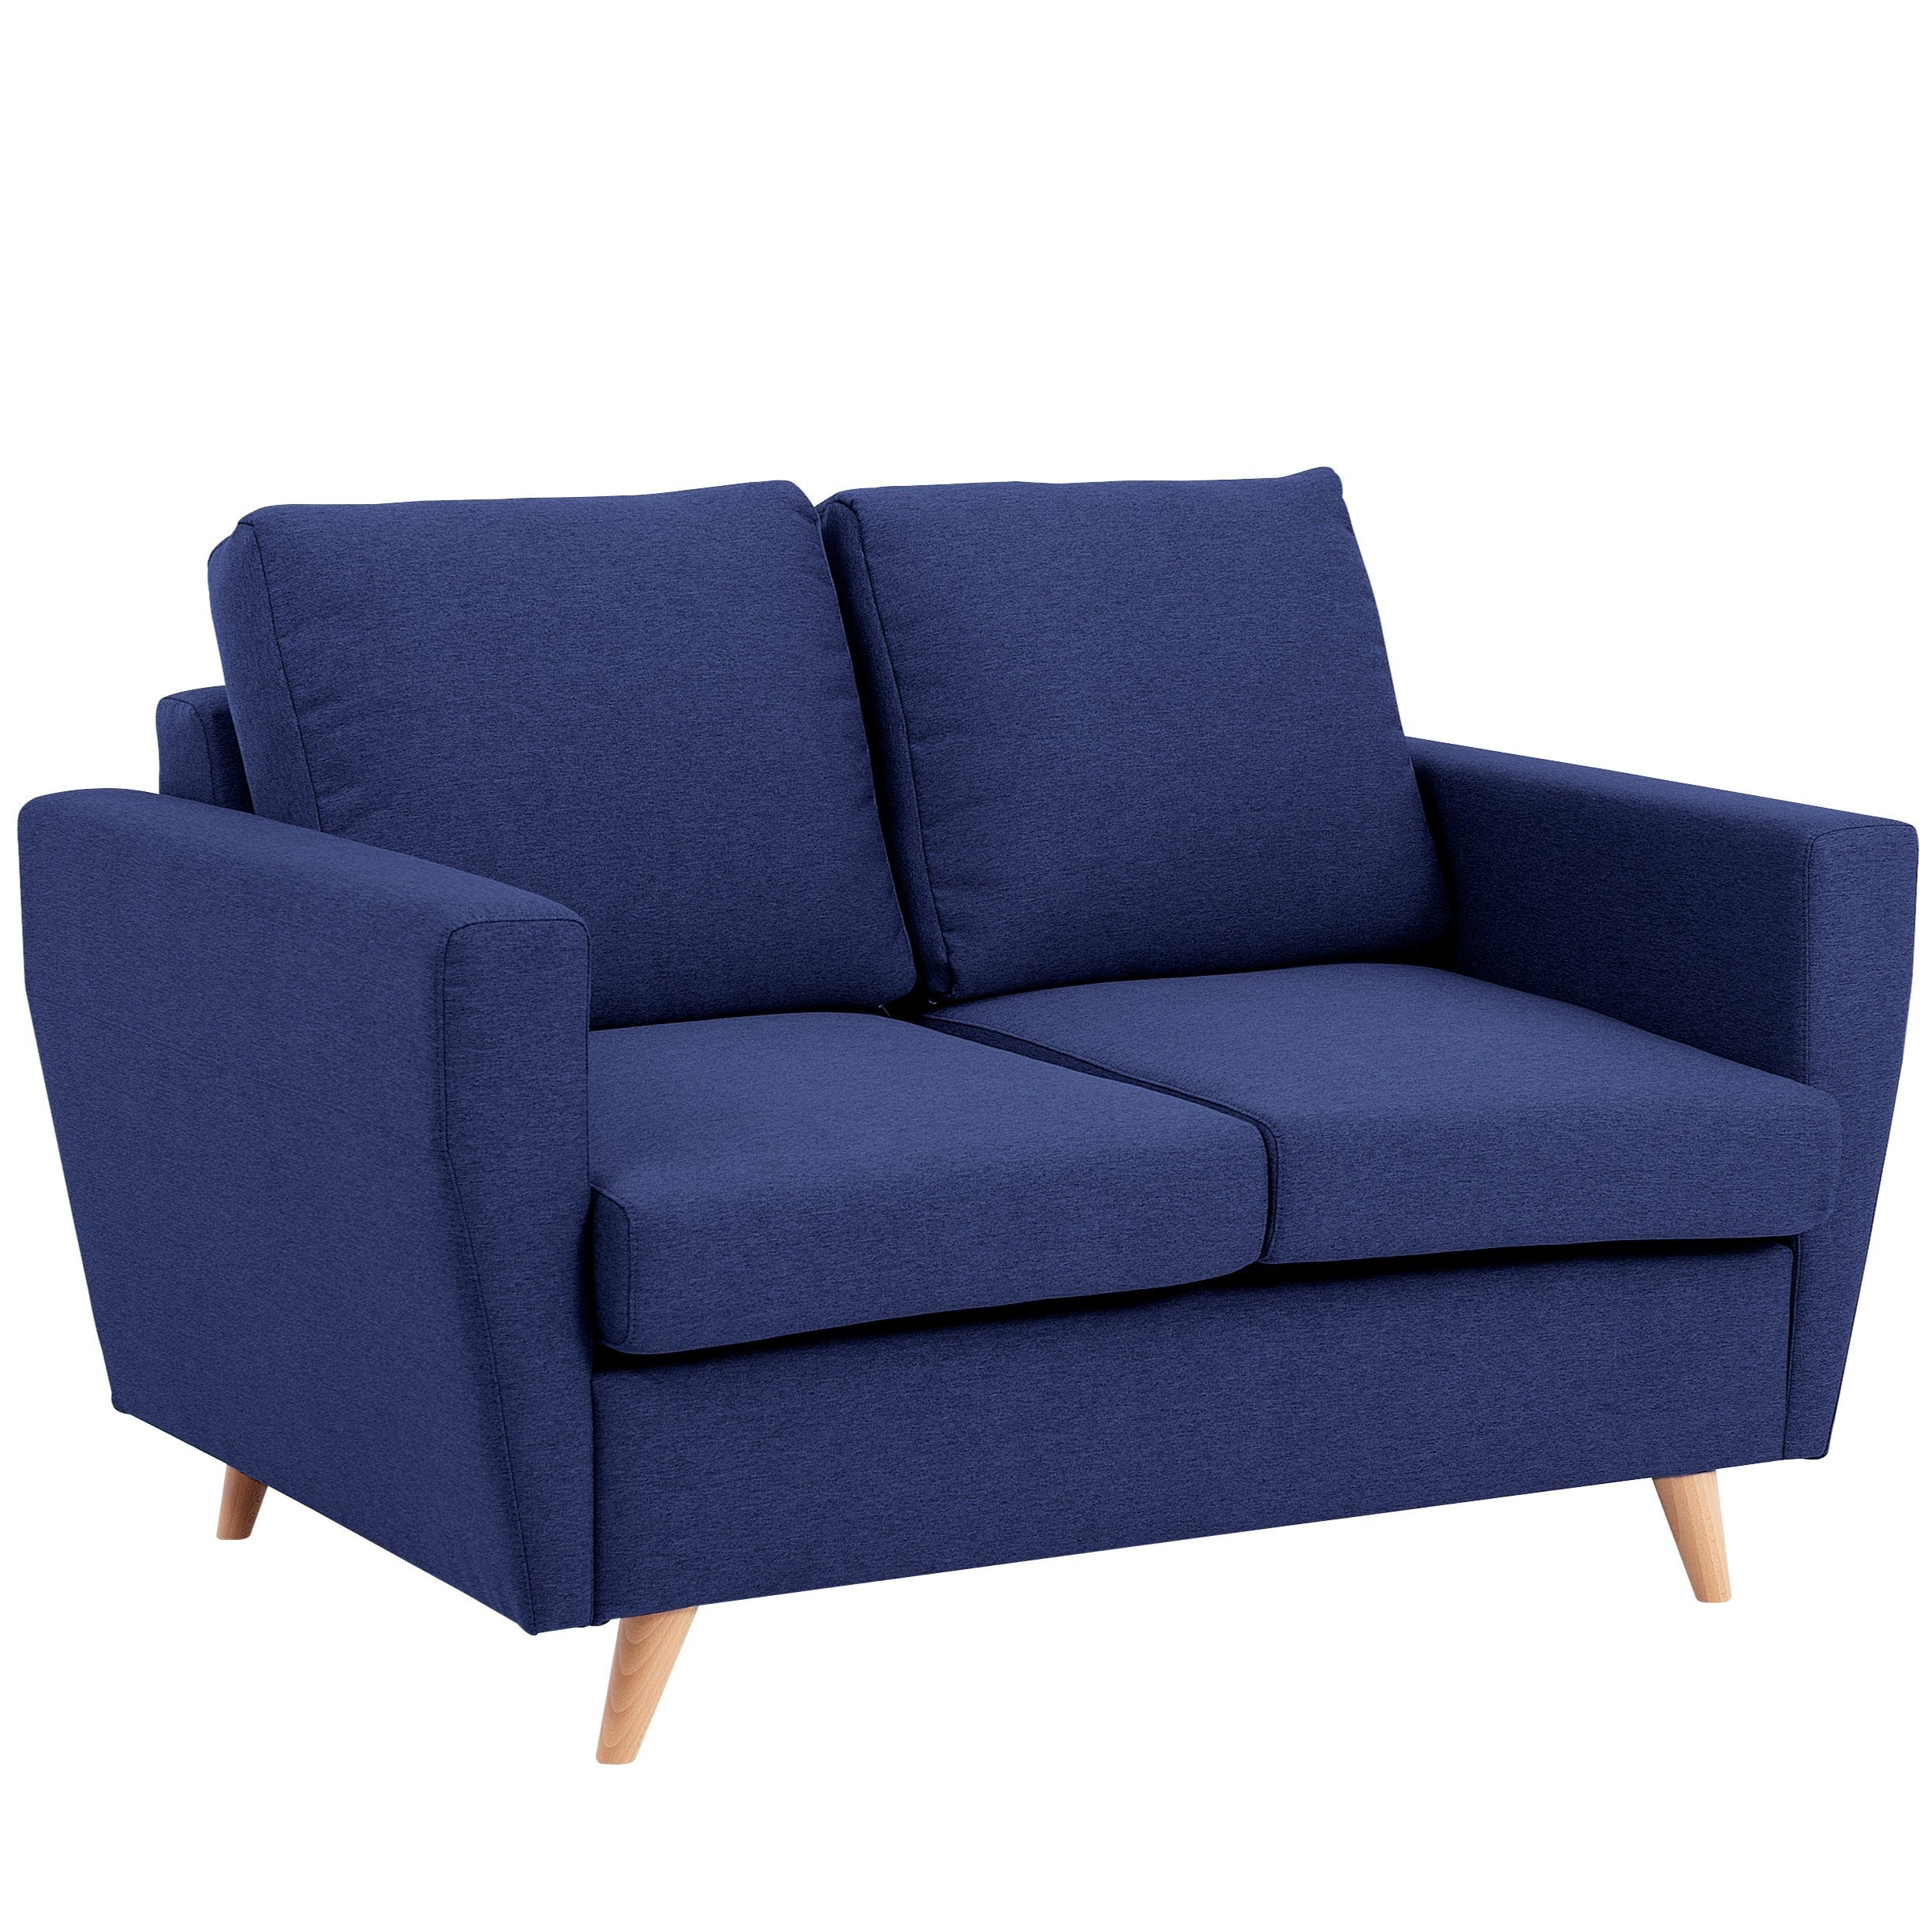 LOVER Sofa upholstery colour-blue-2 seats